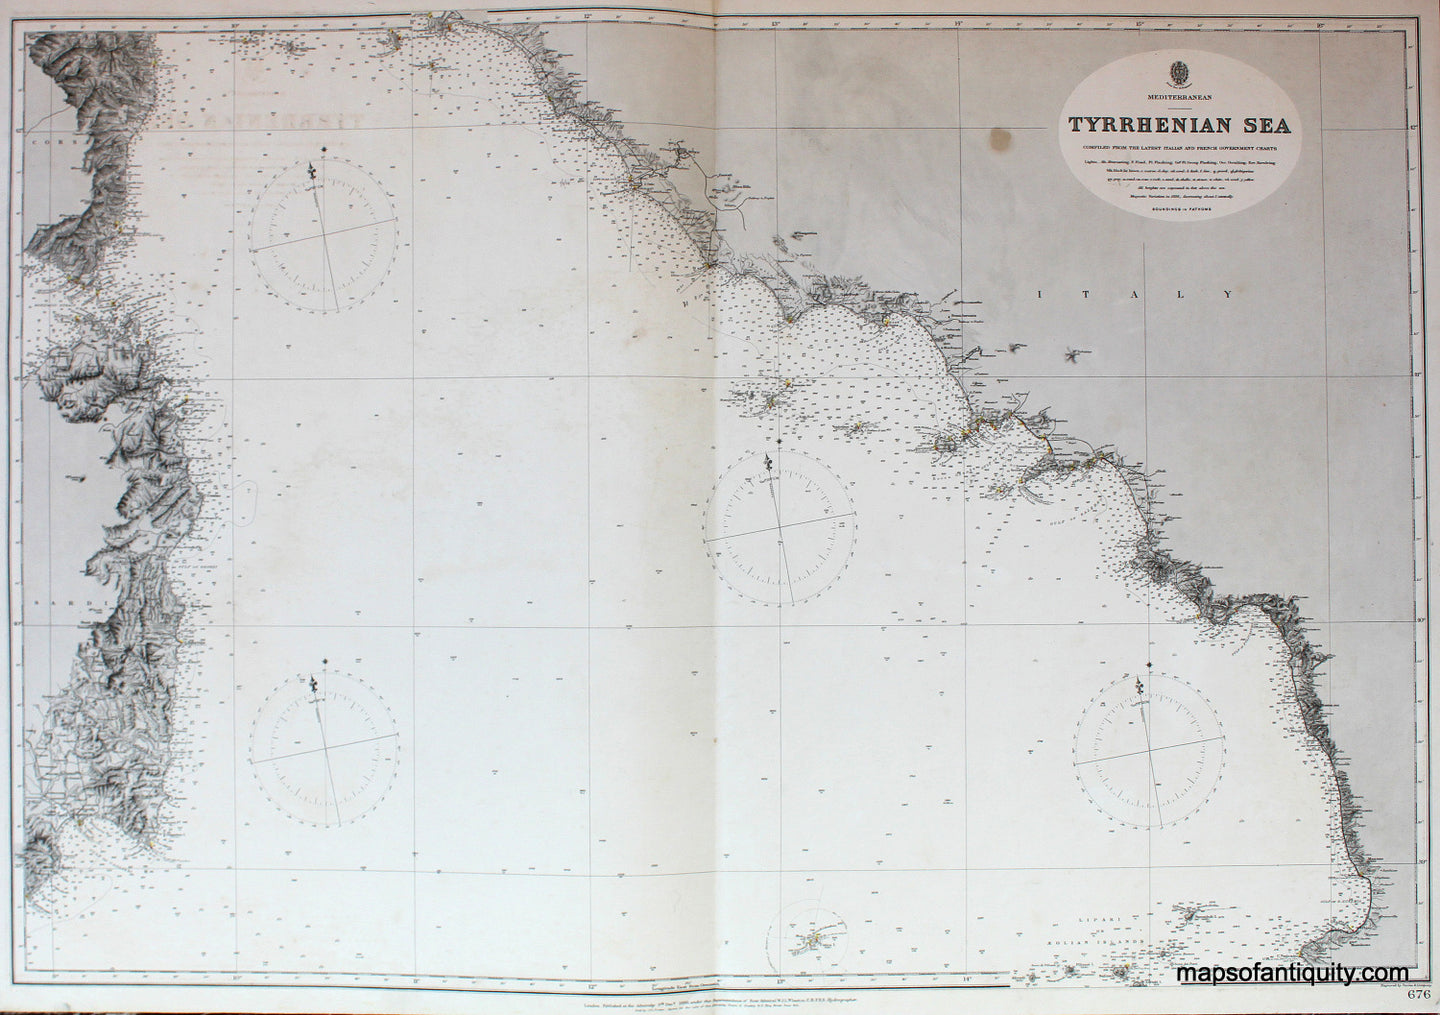 Black-and-White-Antique-Chart-Mediterranean---Italy-Corsica-Sardegna---Tyrrhenian-Sea-**UNAVAILABLE**-Italy--1895-British-Admiralty-Maps-Of-Antiquity